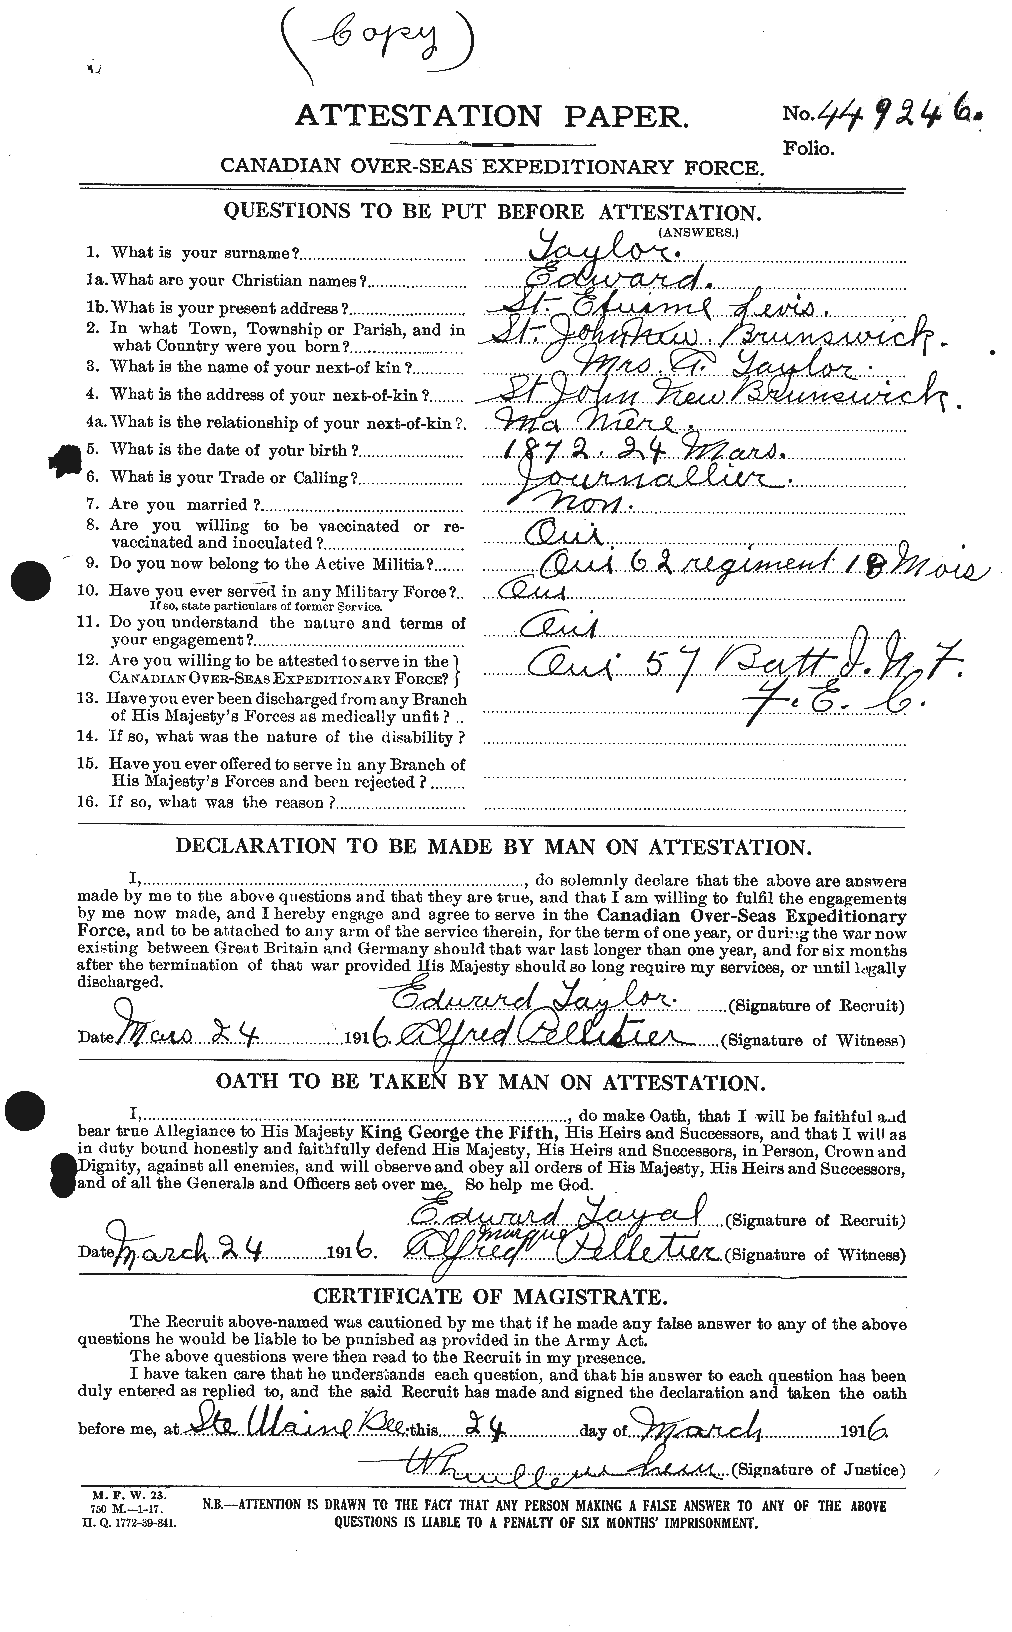 Personnel Records of the First World War - CEF 627285a